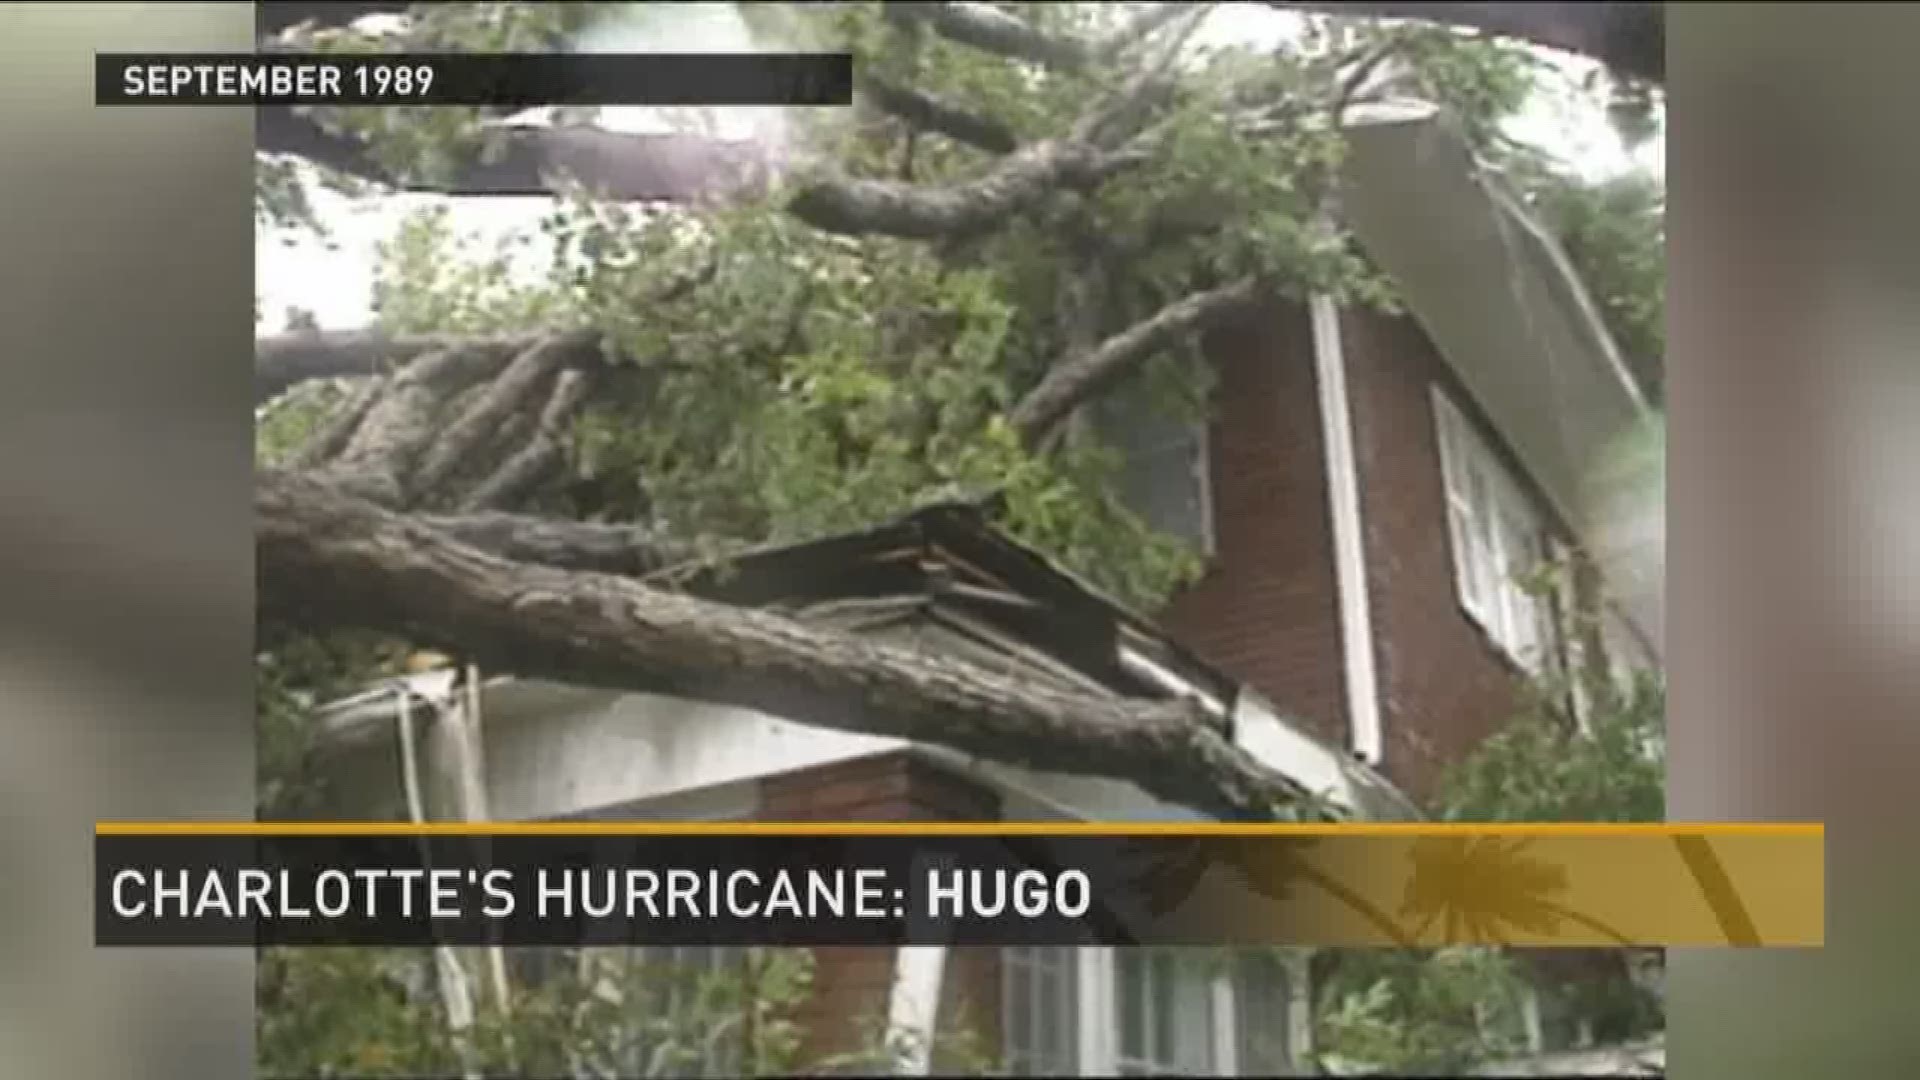 Still to this day, Hugo is the most intense storm to hit the east coast, north of Florida since 1900.